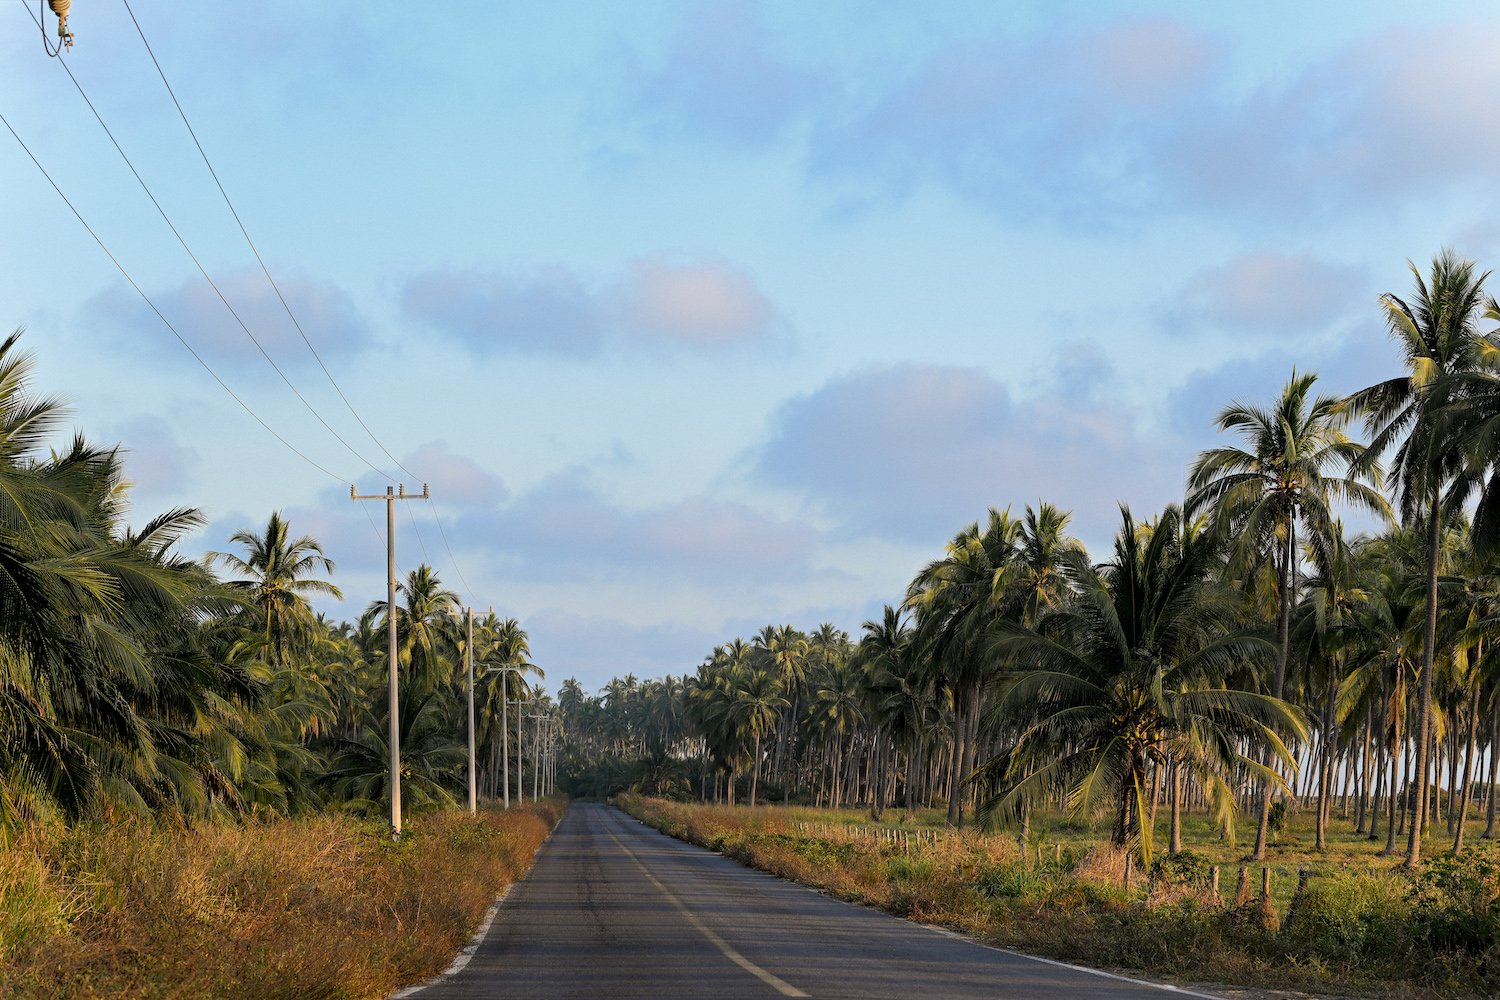 Coconut palm groves along a road in Colima, Mexico